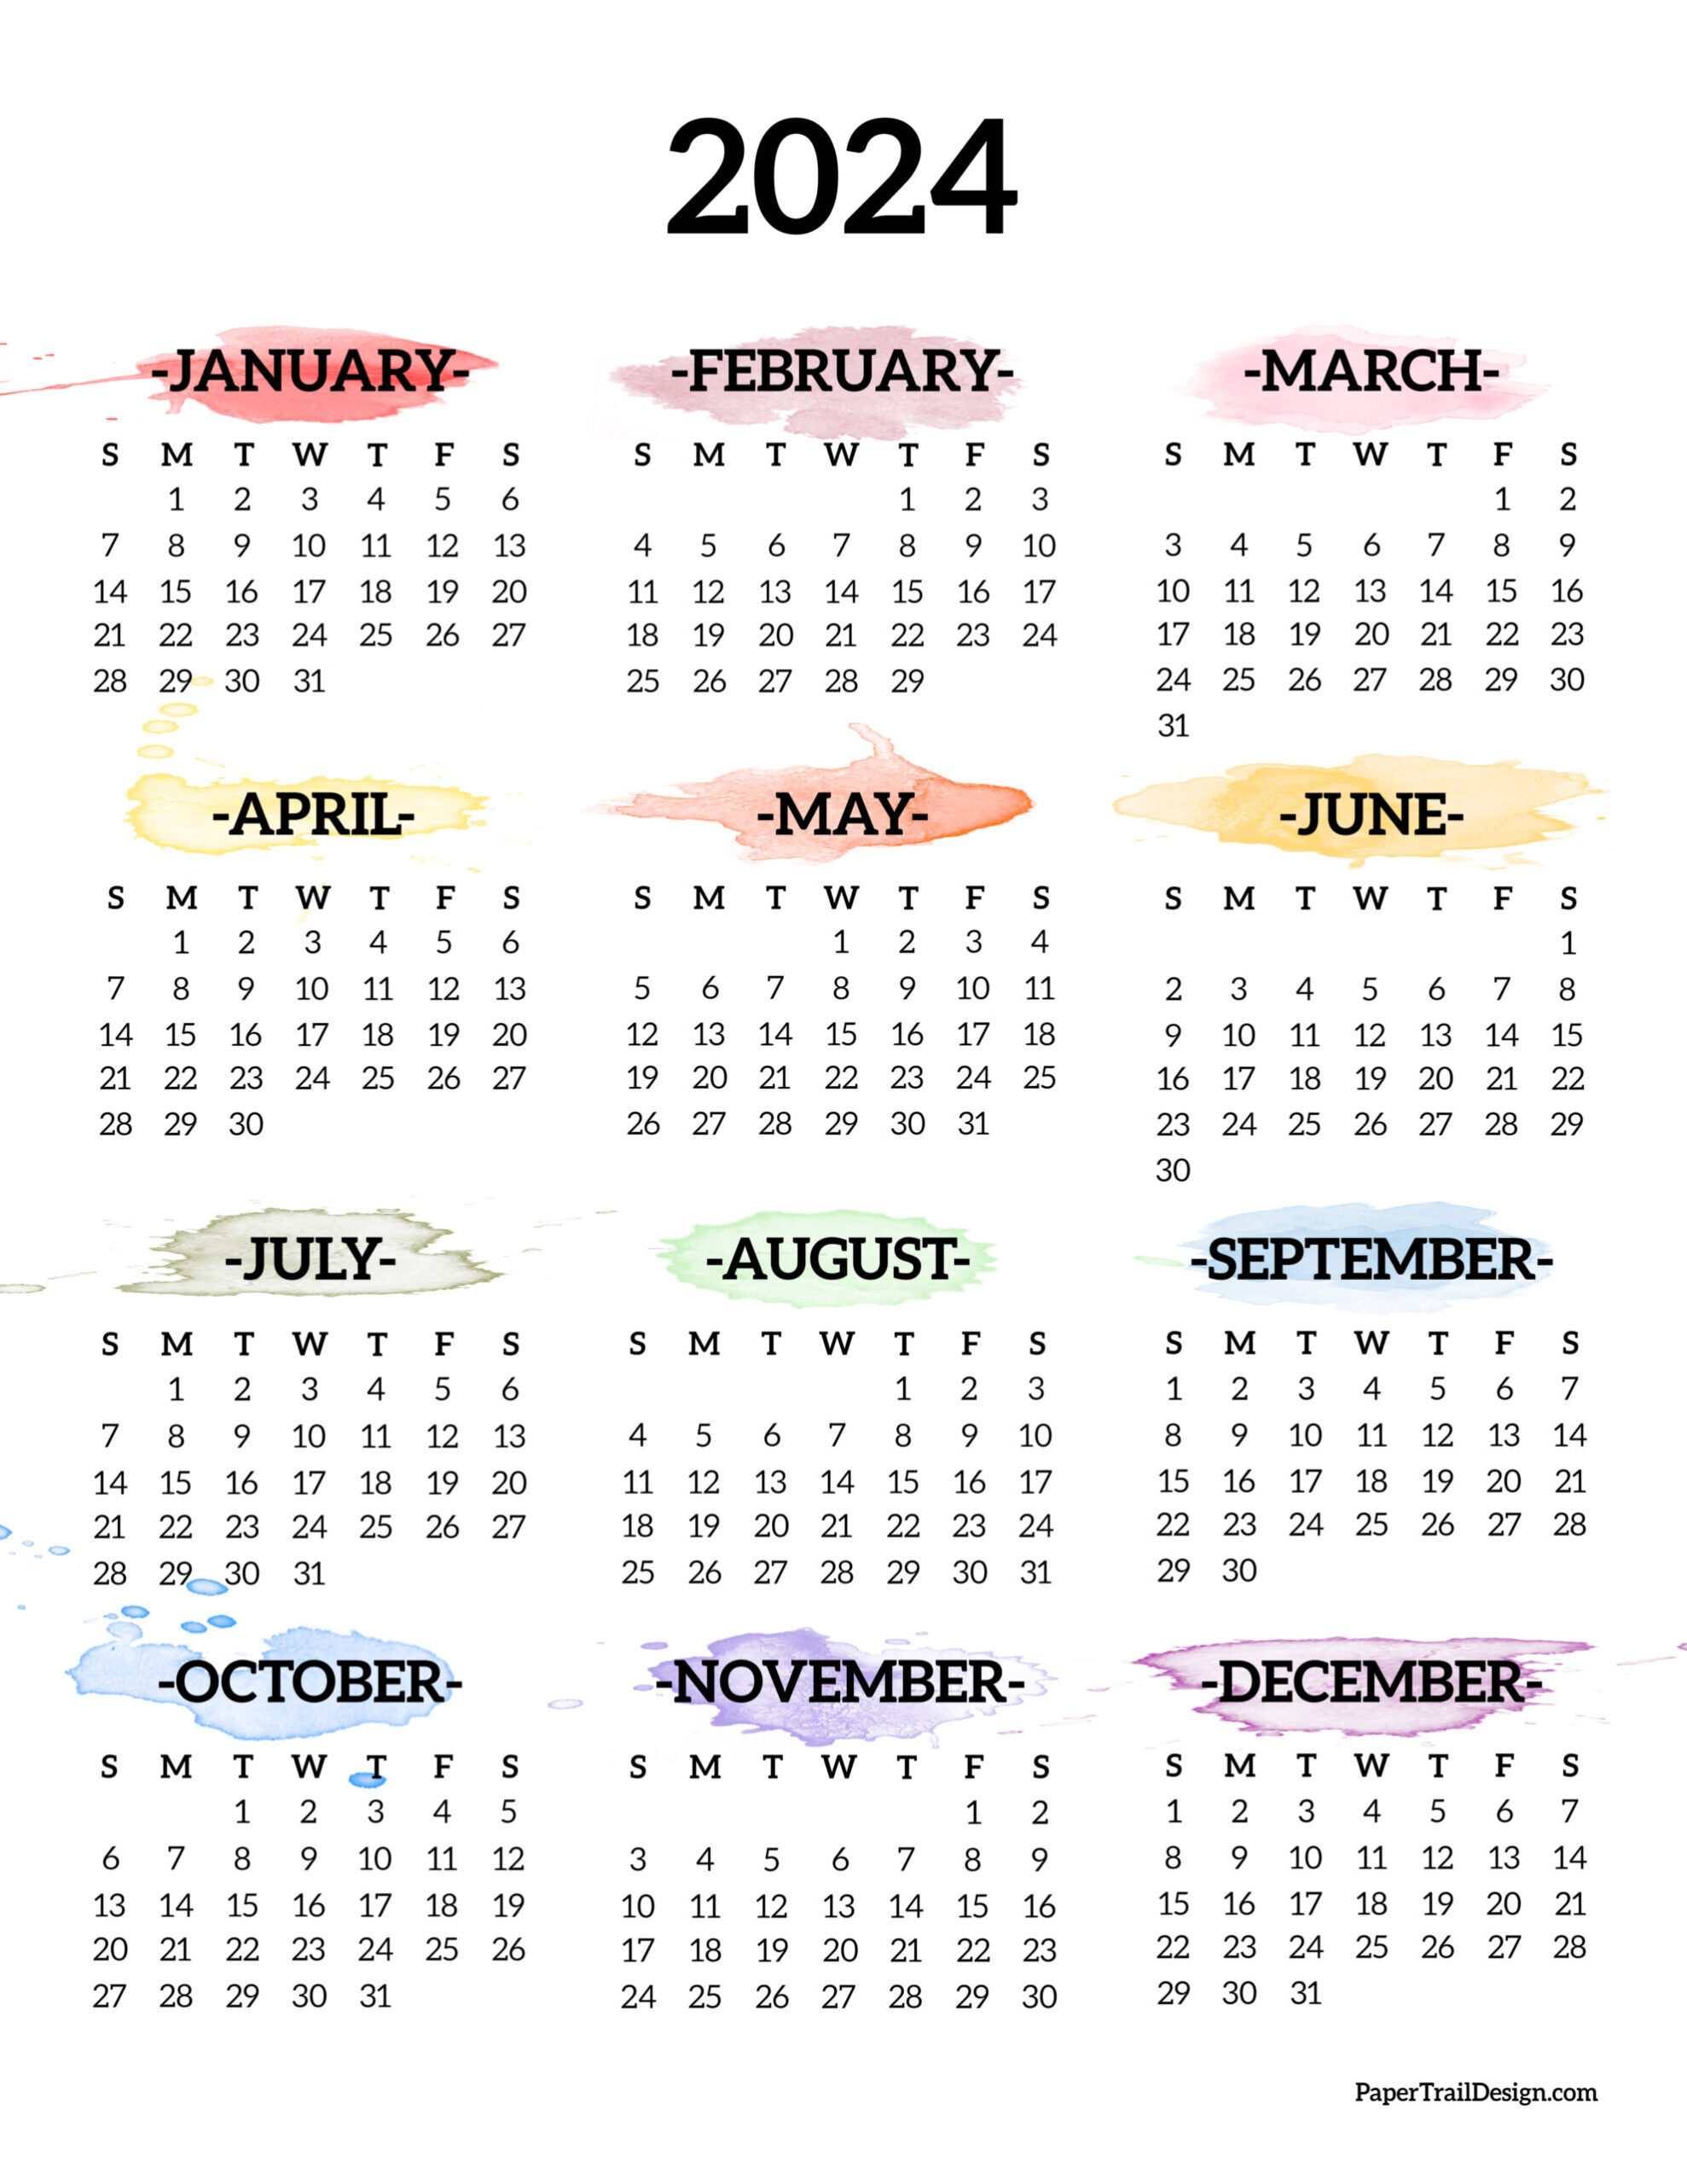 Calendar 2024 Printable One Page - Paper Trail Design for One Page Calendar 2024 Printable